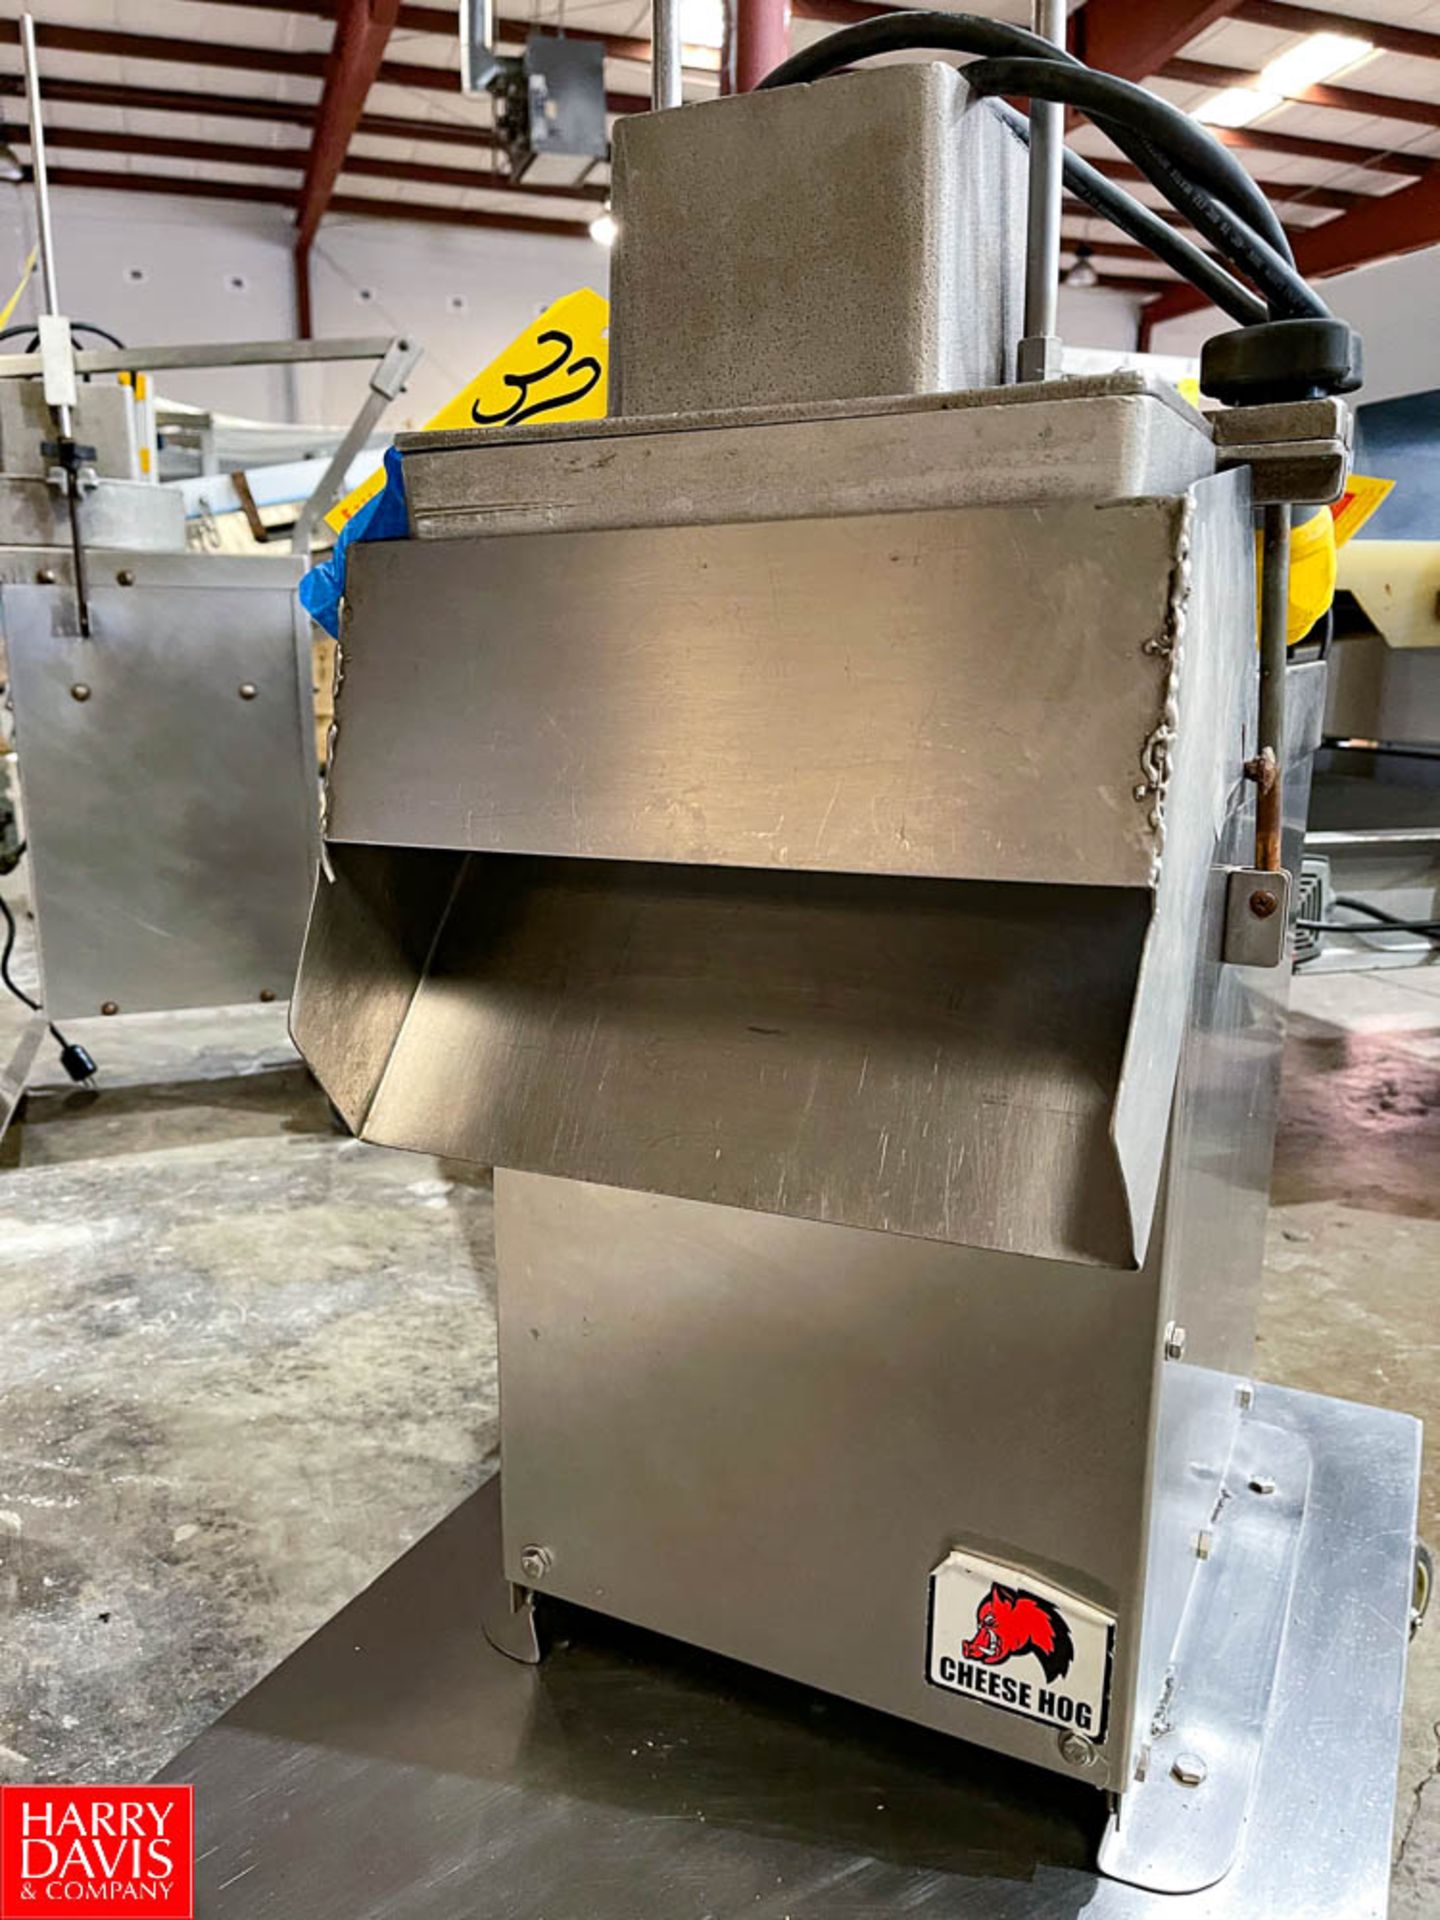 Cheese Hog S/S Cheese Grinder, Model: GS1. Rigging Fee: $250